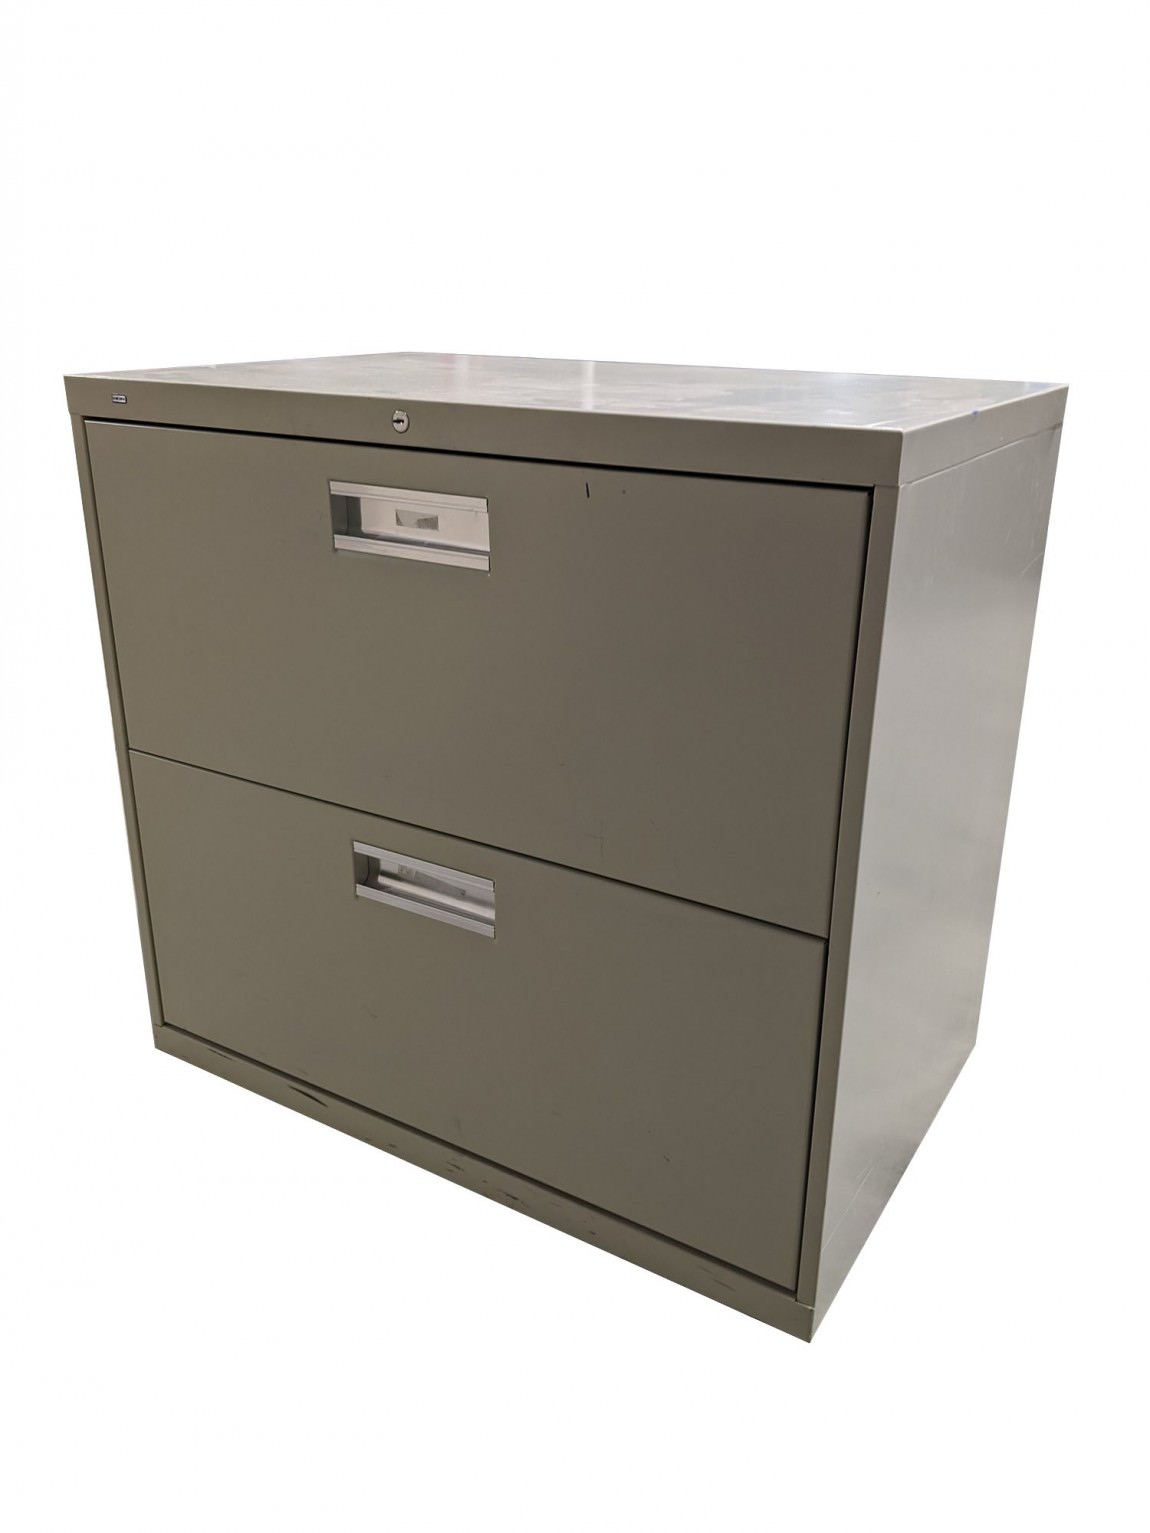 Putty Hon 2 Drawer Lateral Filing Cabinet – 30 Inch Wide